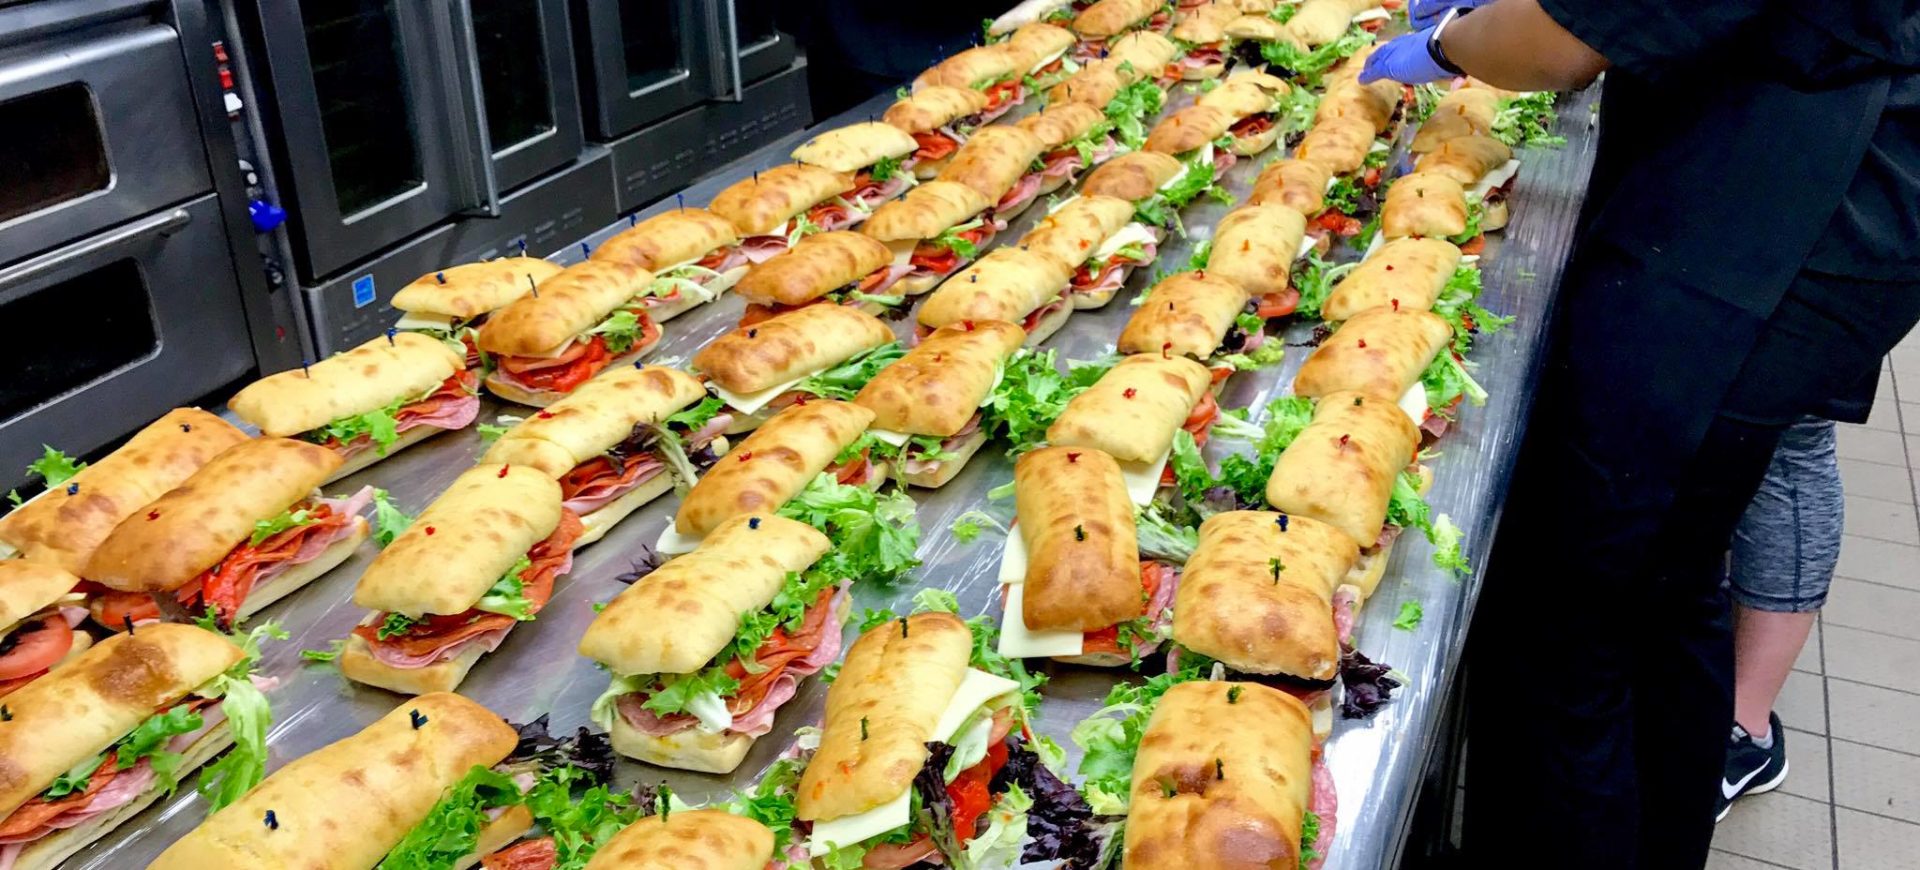 Sandwiches on trays